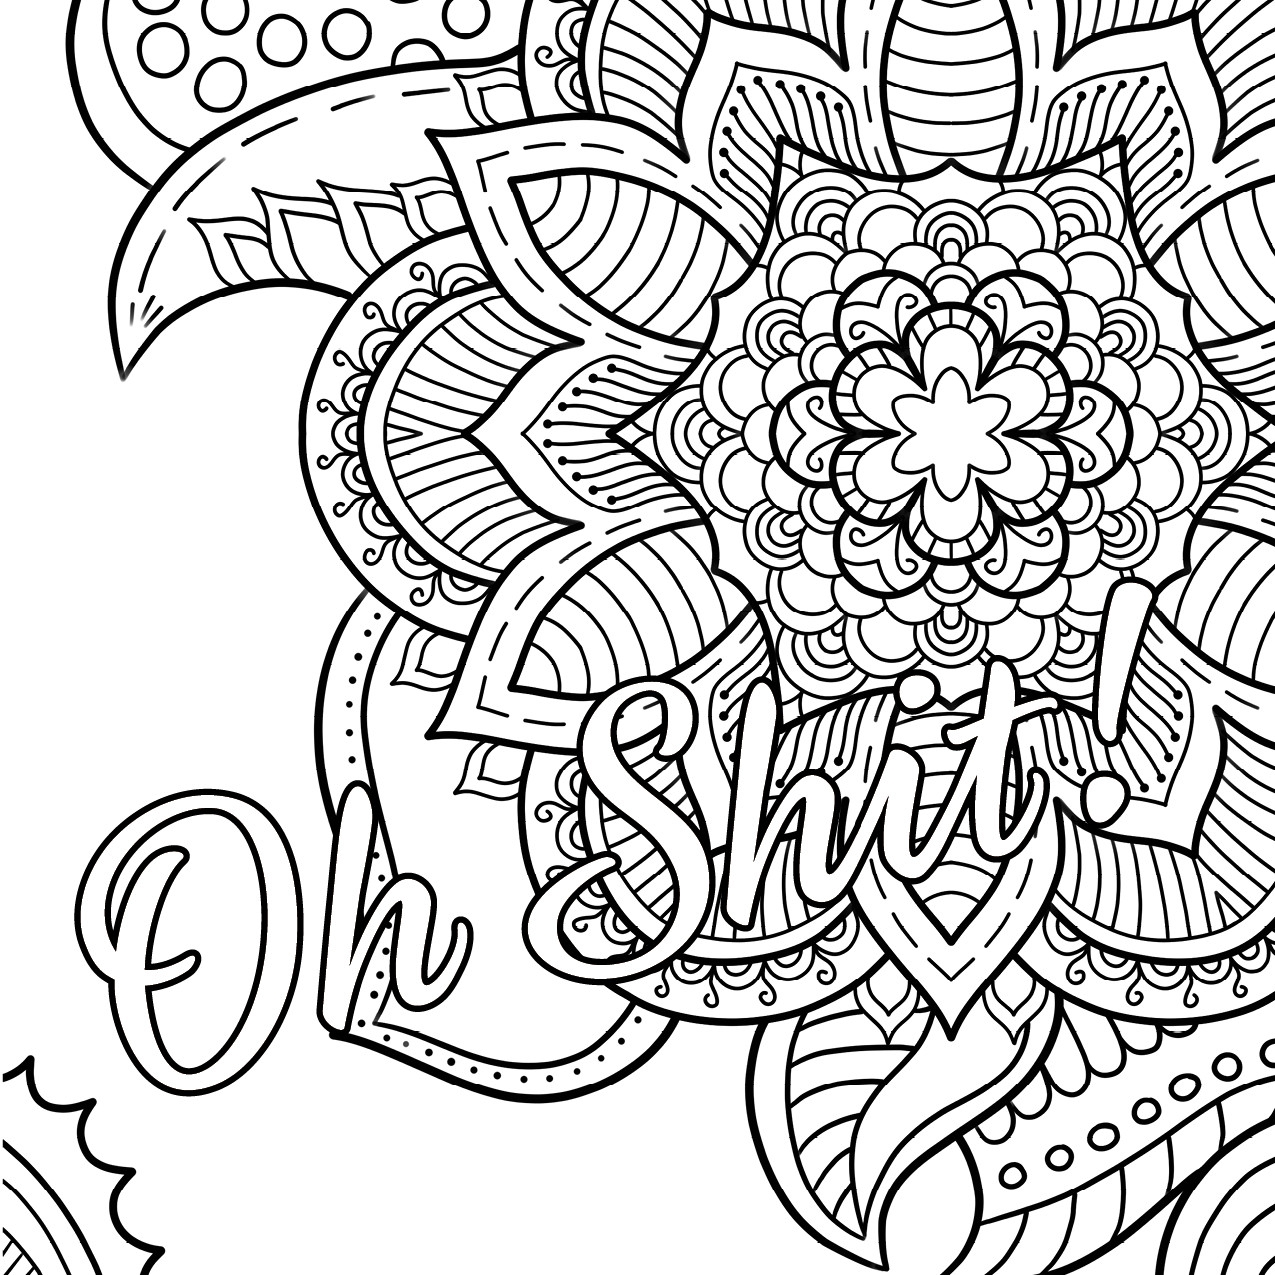 Adult Swear Coloring Pages
 Oh Shit Free Coloring Page Swear Word Coloring Book